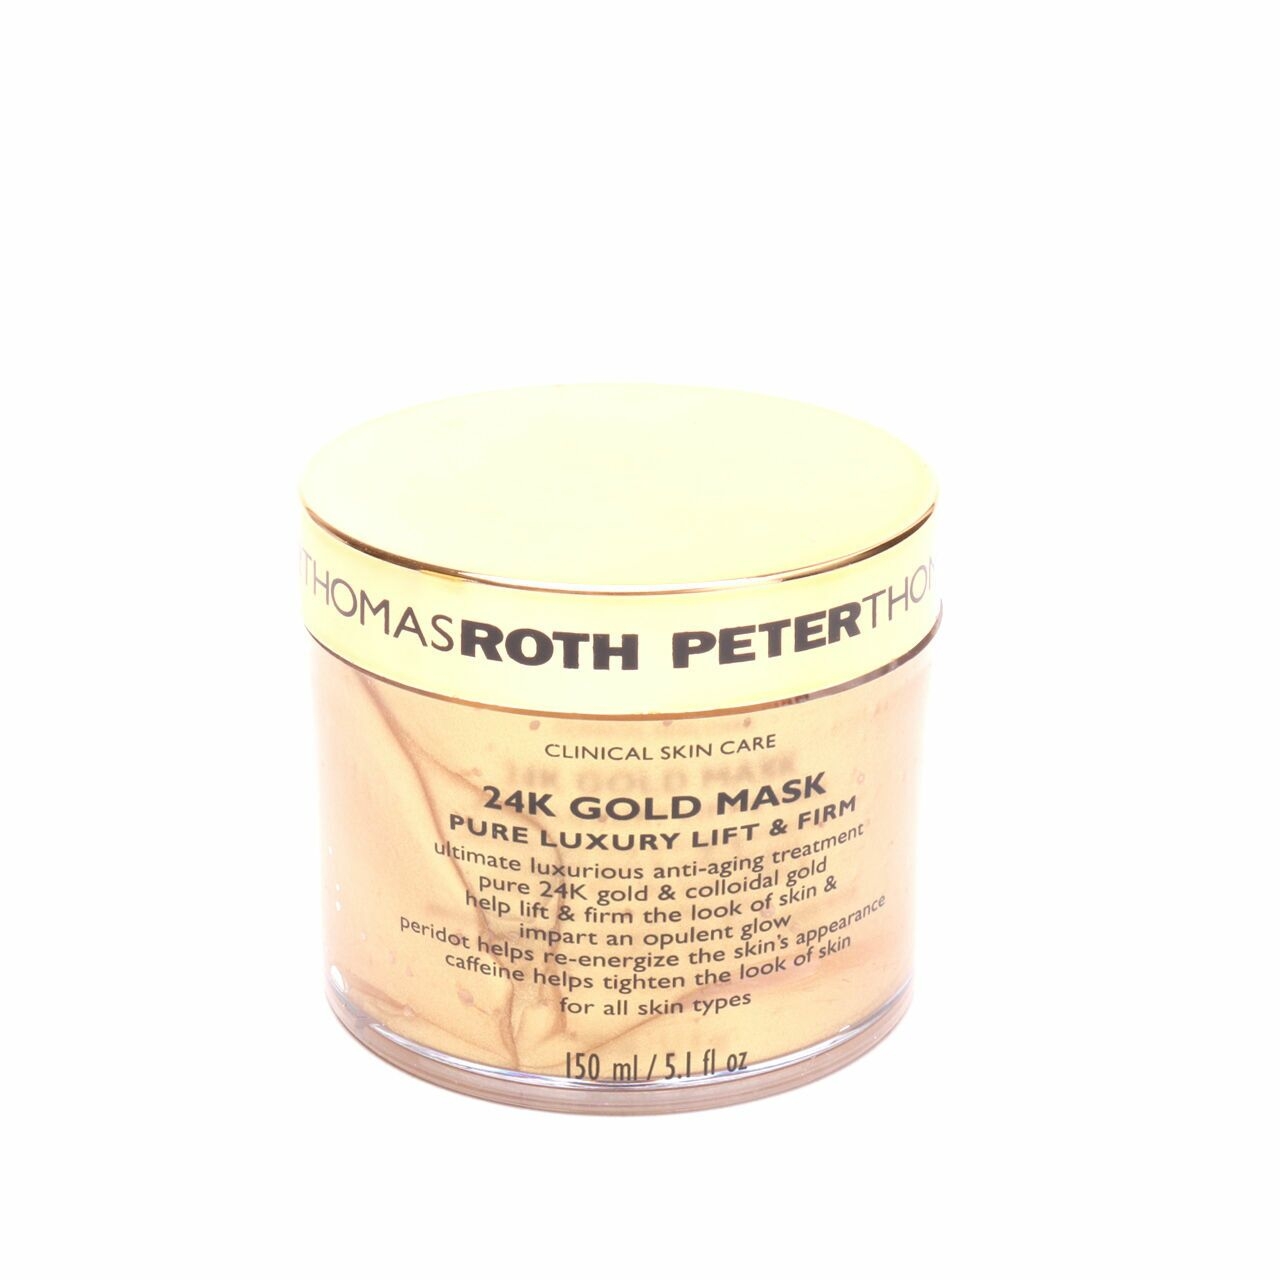 peter thomas roth 24K Gold Mask Pure Luxury Lift & Firm Mask Faces